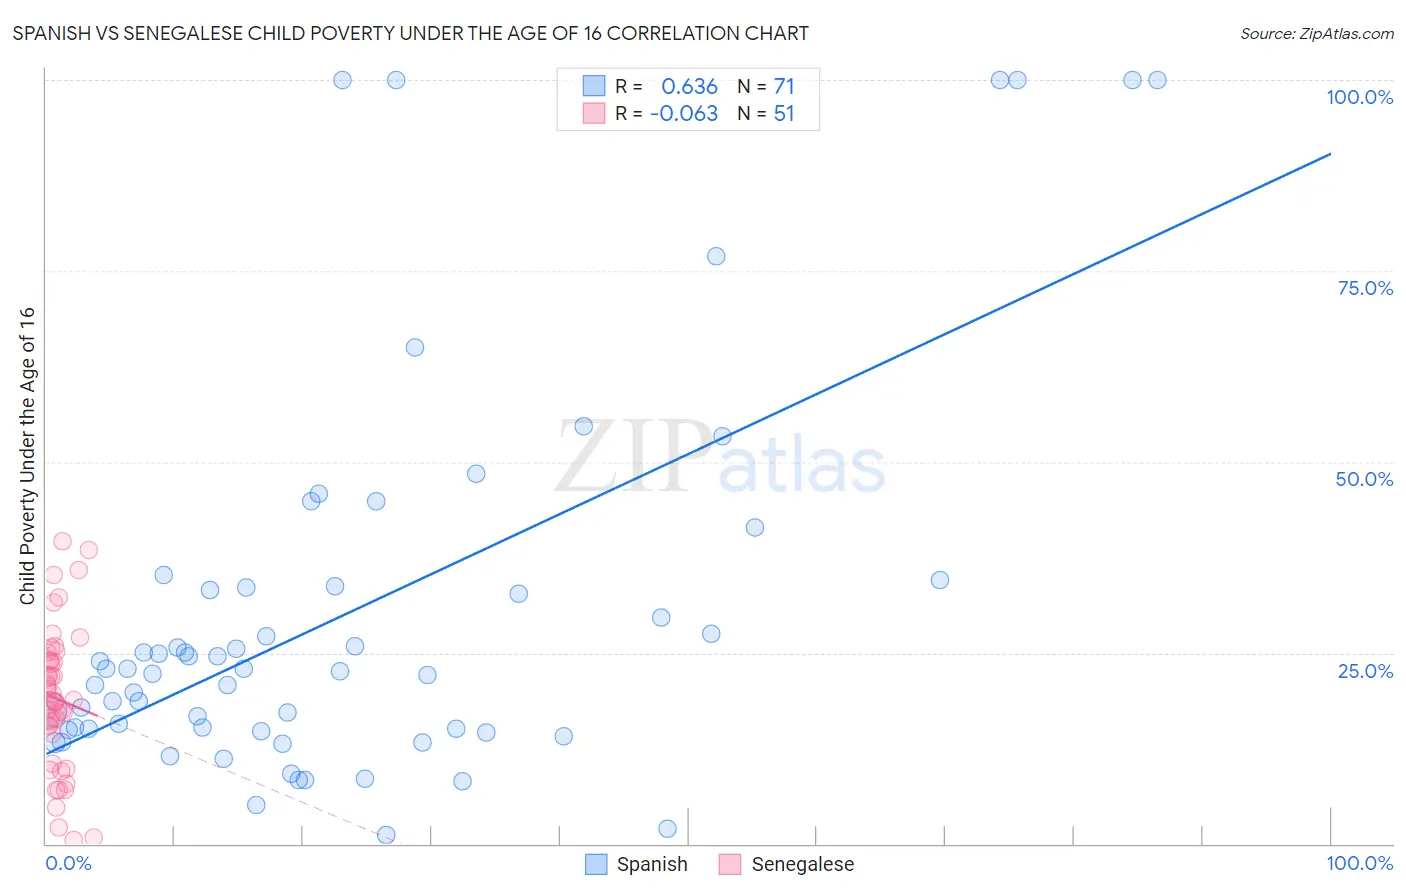 Spanish vs Senegalese Child Poverty Under the Age of 16